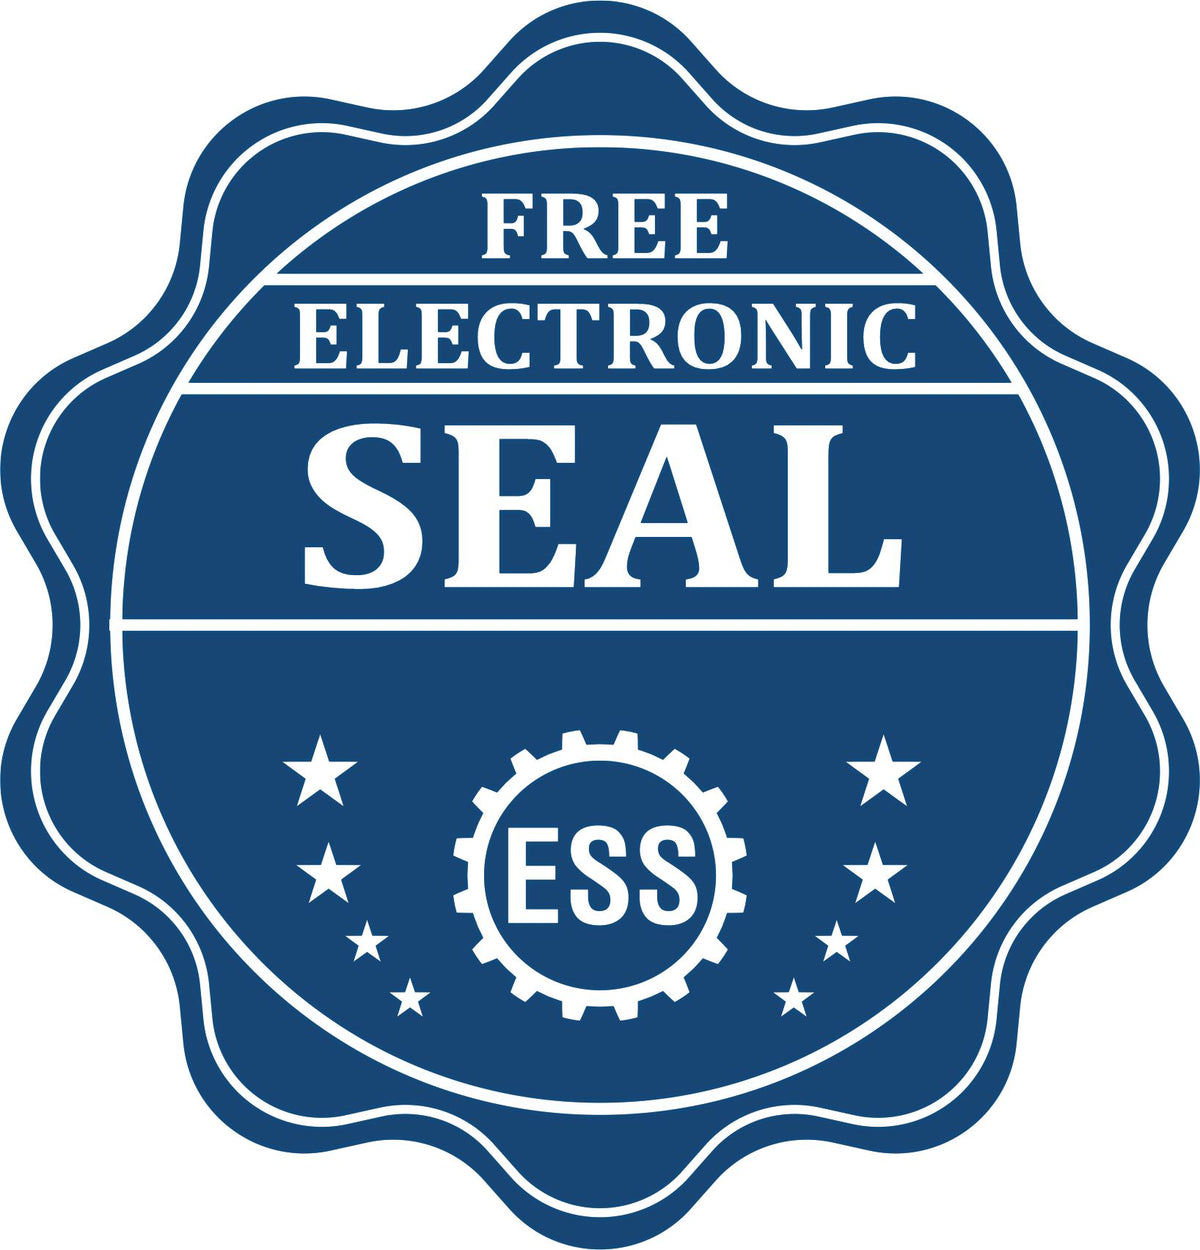 A badge showing a free electronic seal for the Premium MaxLight Pre-Inked South Carolina Engineering Stamp with stars and the ESS gear on the emblem.